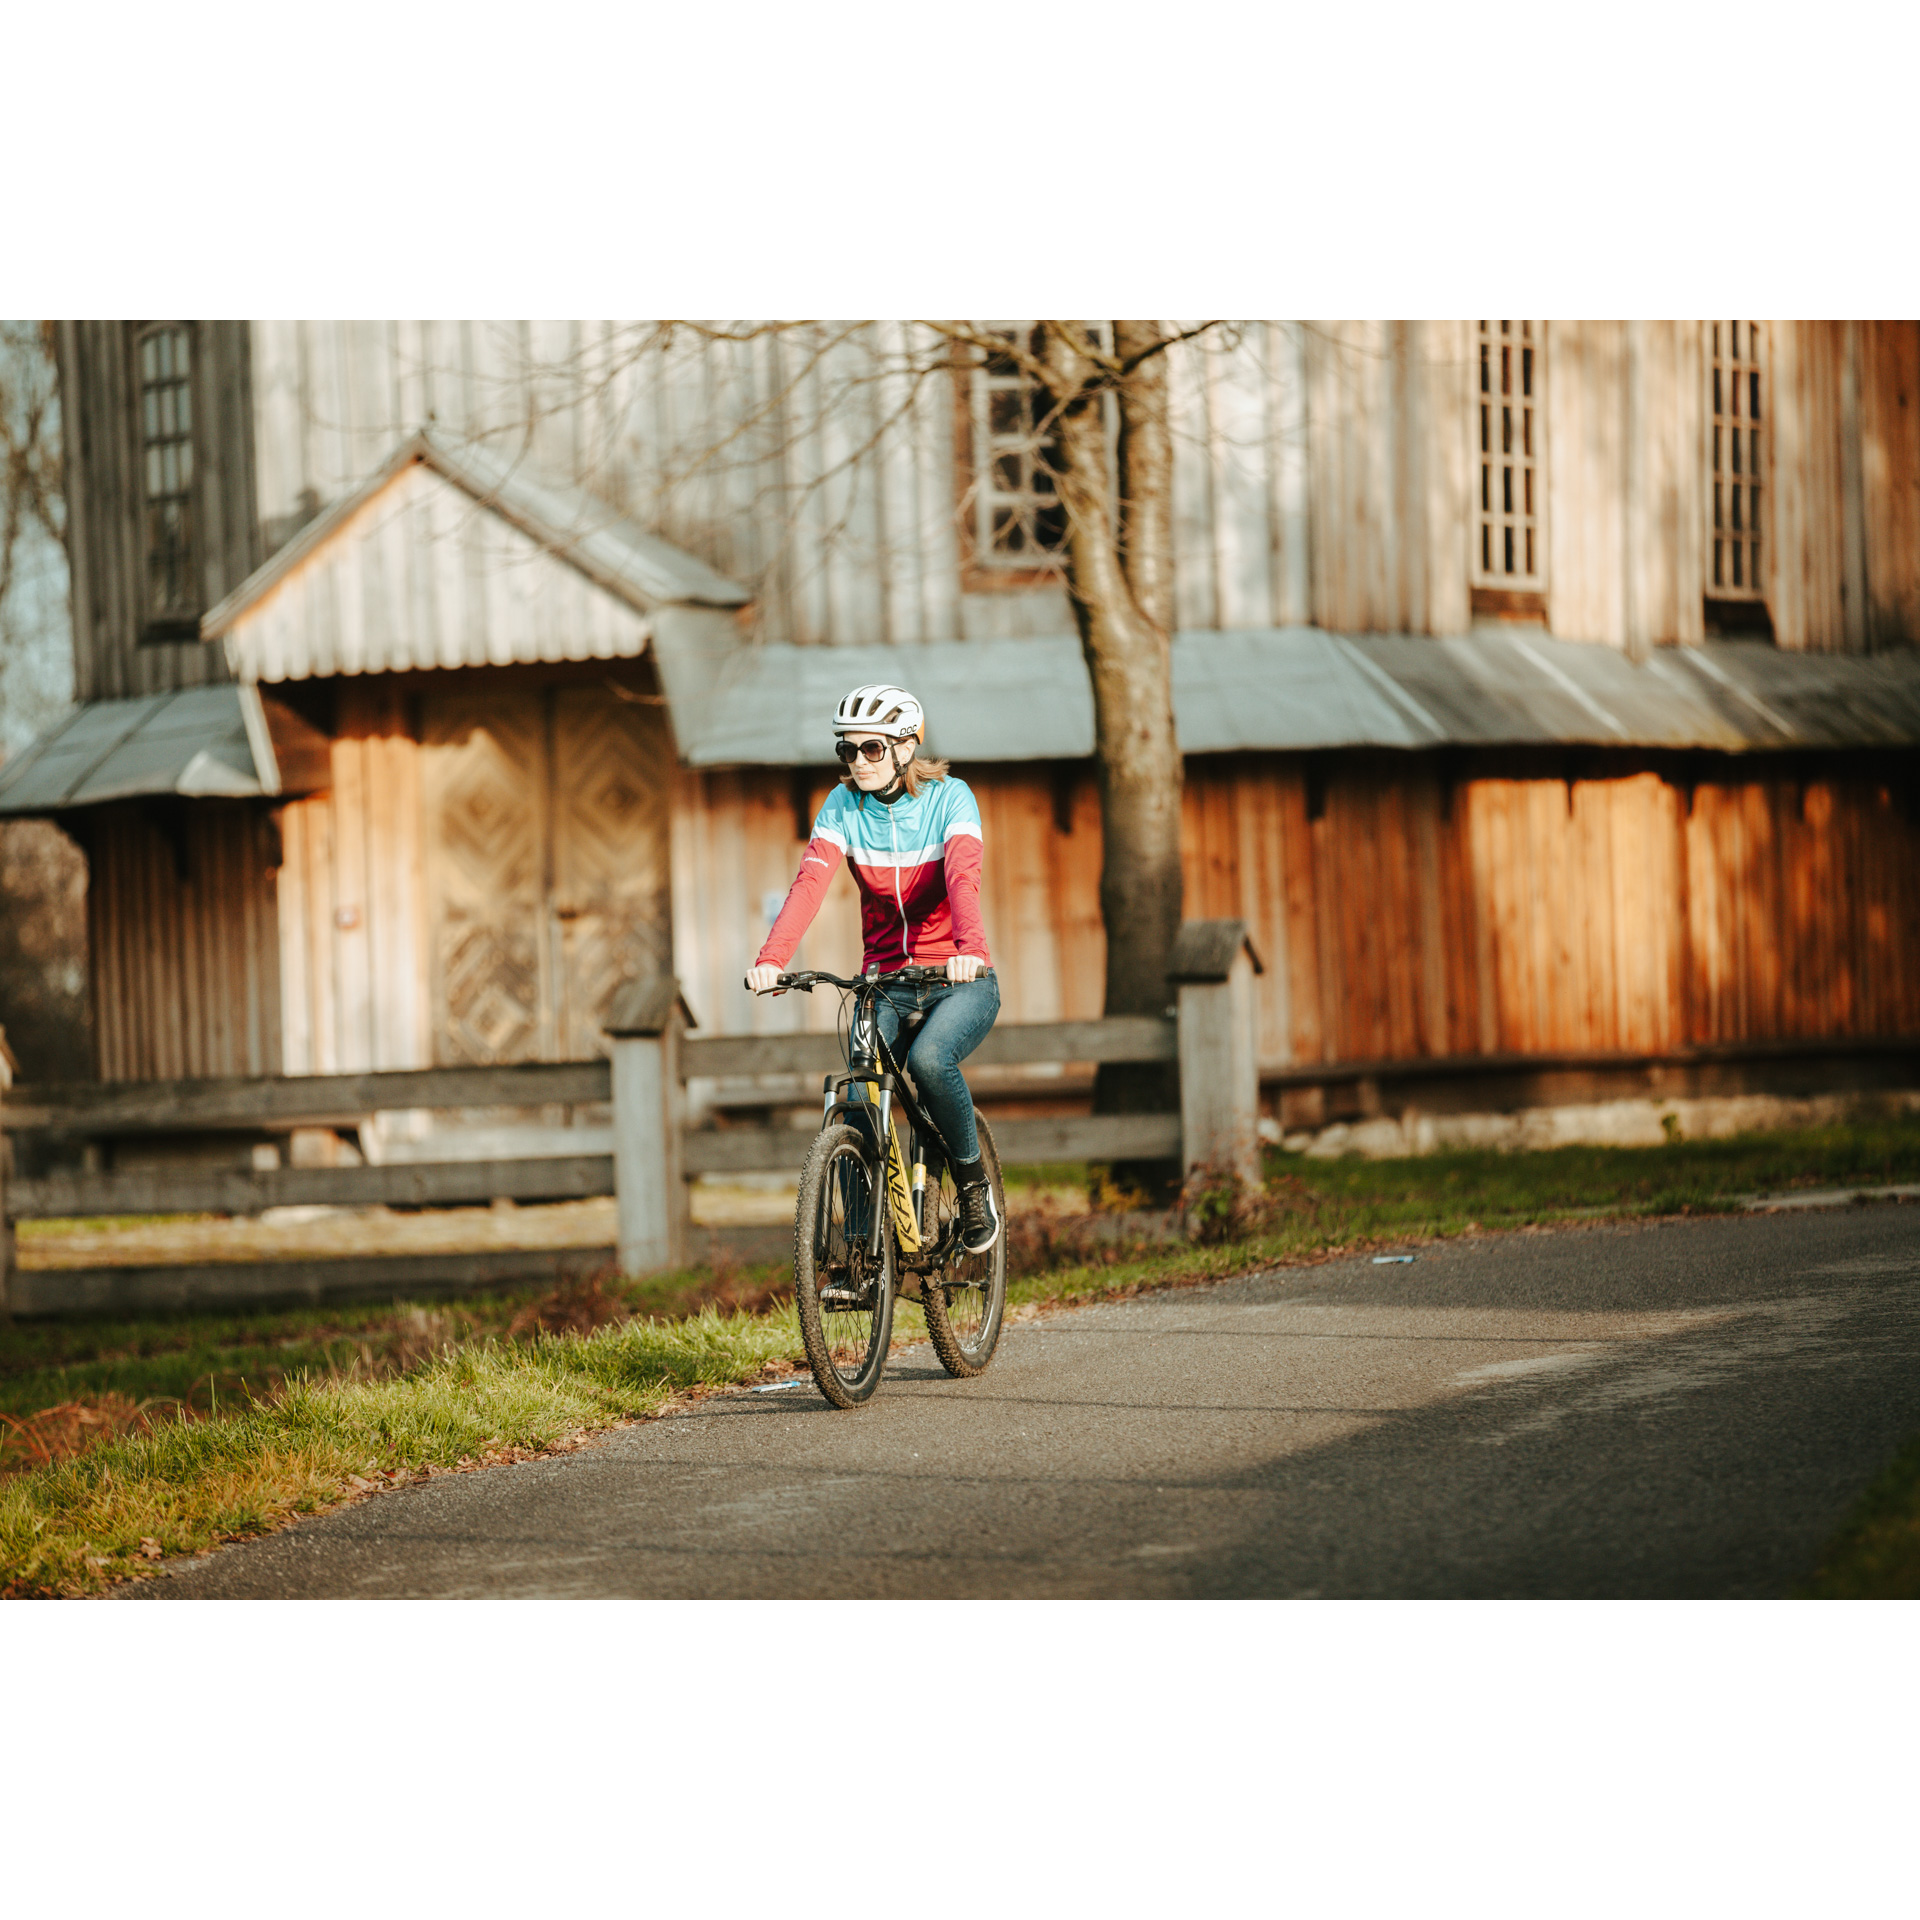 A cyclist in a red-blue jacket and helmet riding a bicycle on an asphalt road, passing a wooden church building